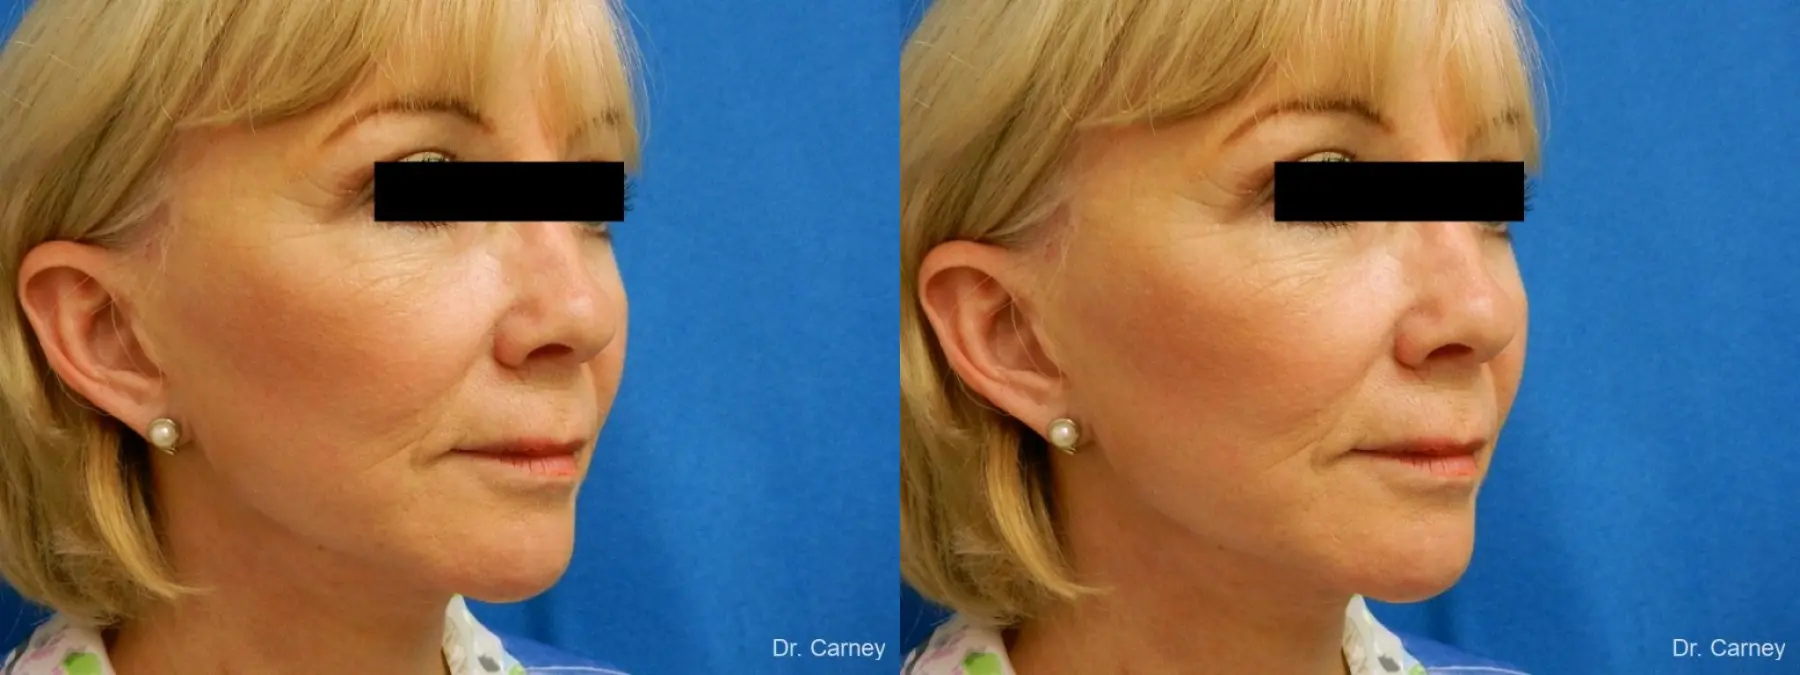 Virginia Beach Laser Skin Resurfacing Face 1263 - Before and After 2